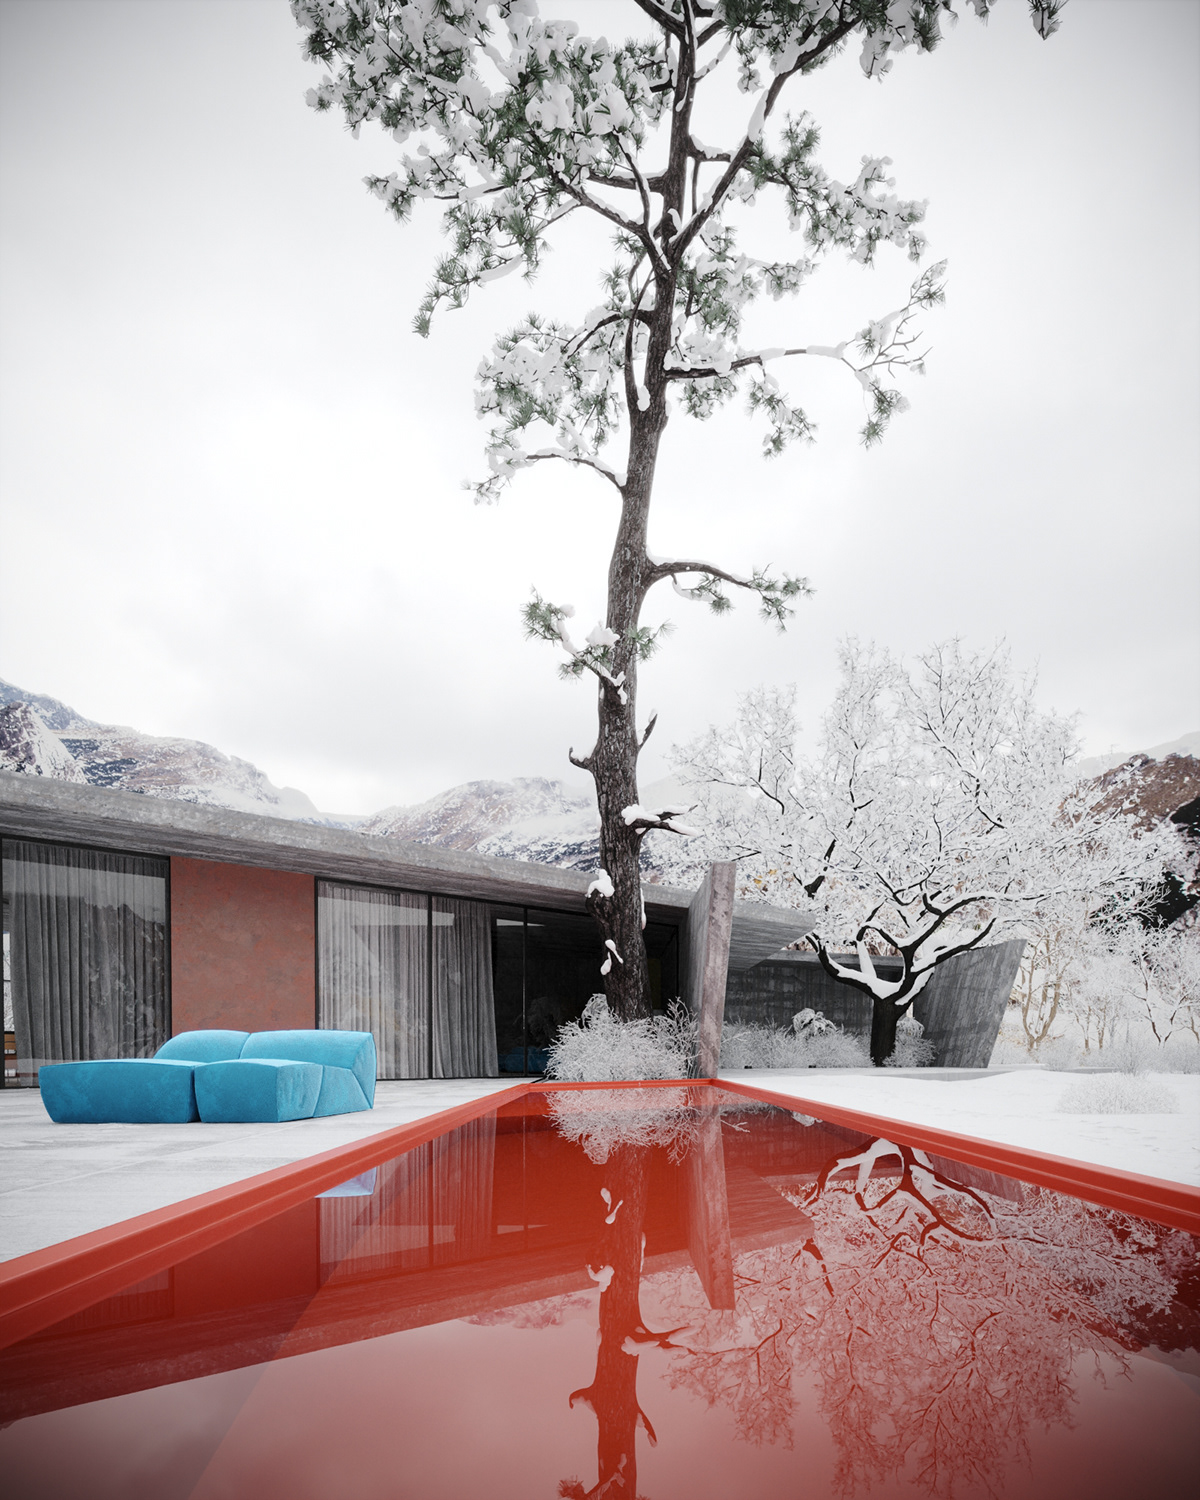 THE RED POOL HOUSE